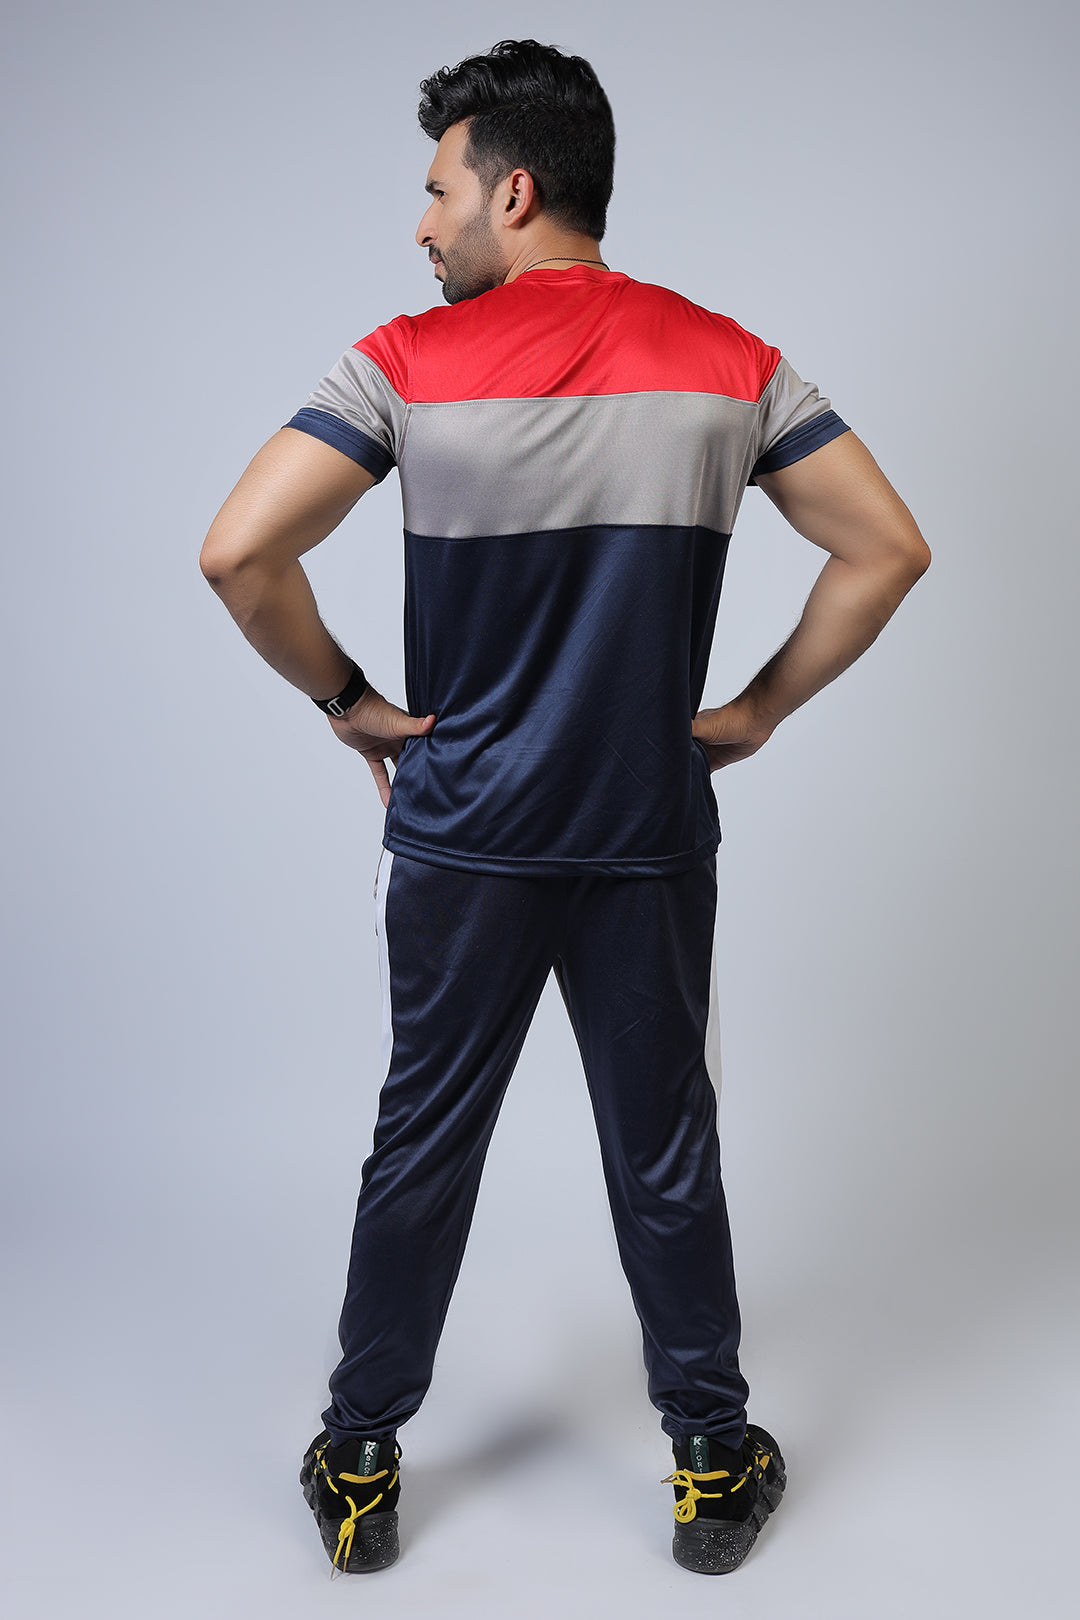 Men's Gym wear Clothing Tracksuits in pakistan,